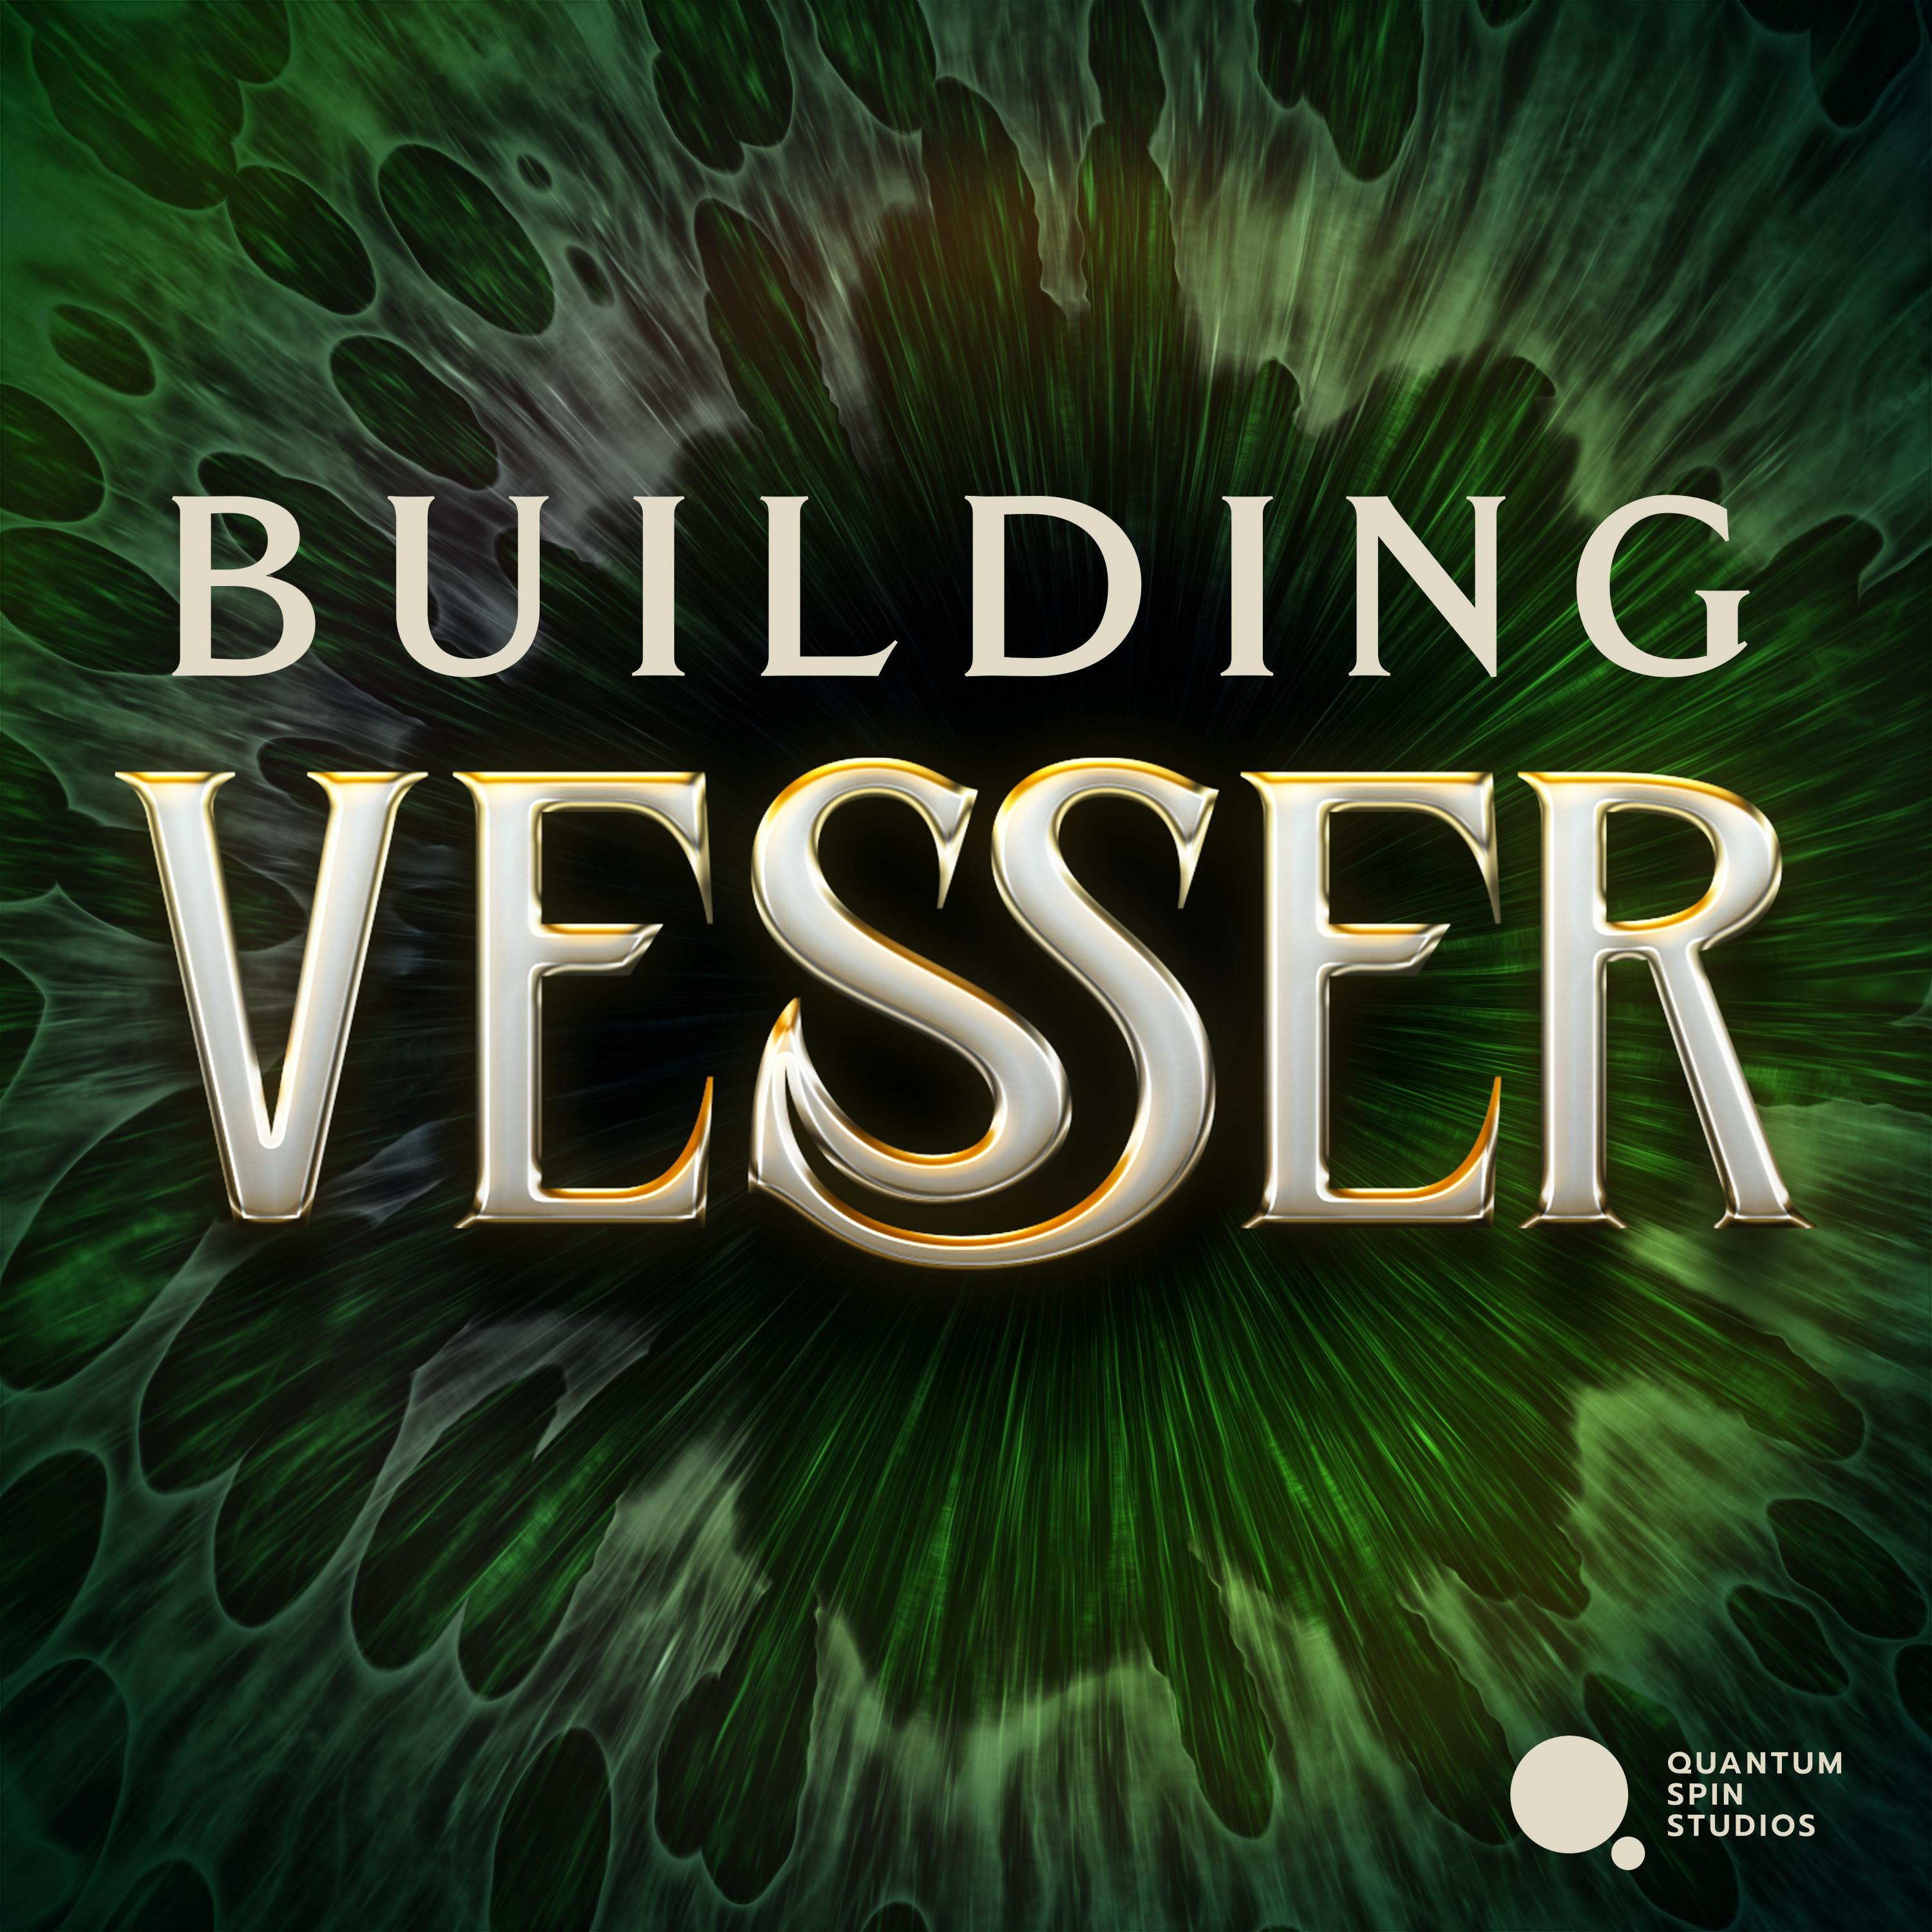 Building Vesser: Emanation, Becoming an Exalted, and New TTRPG Players